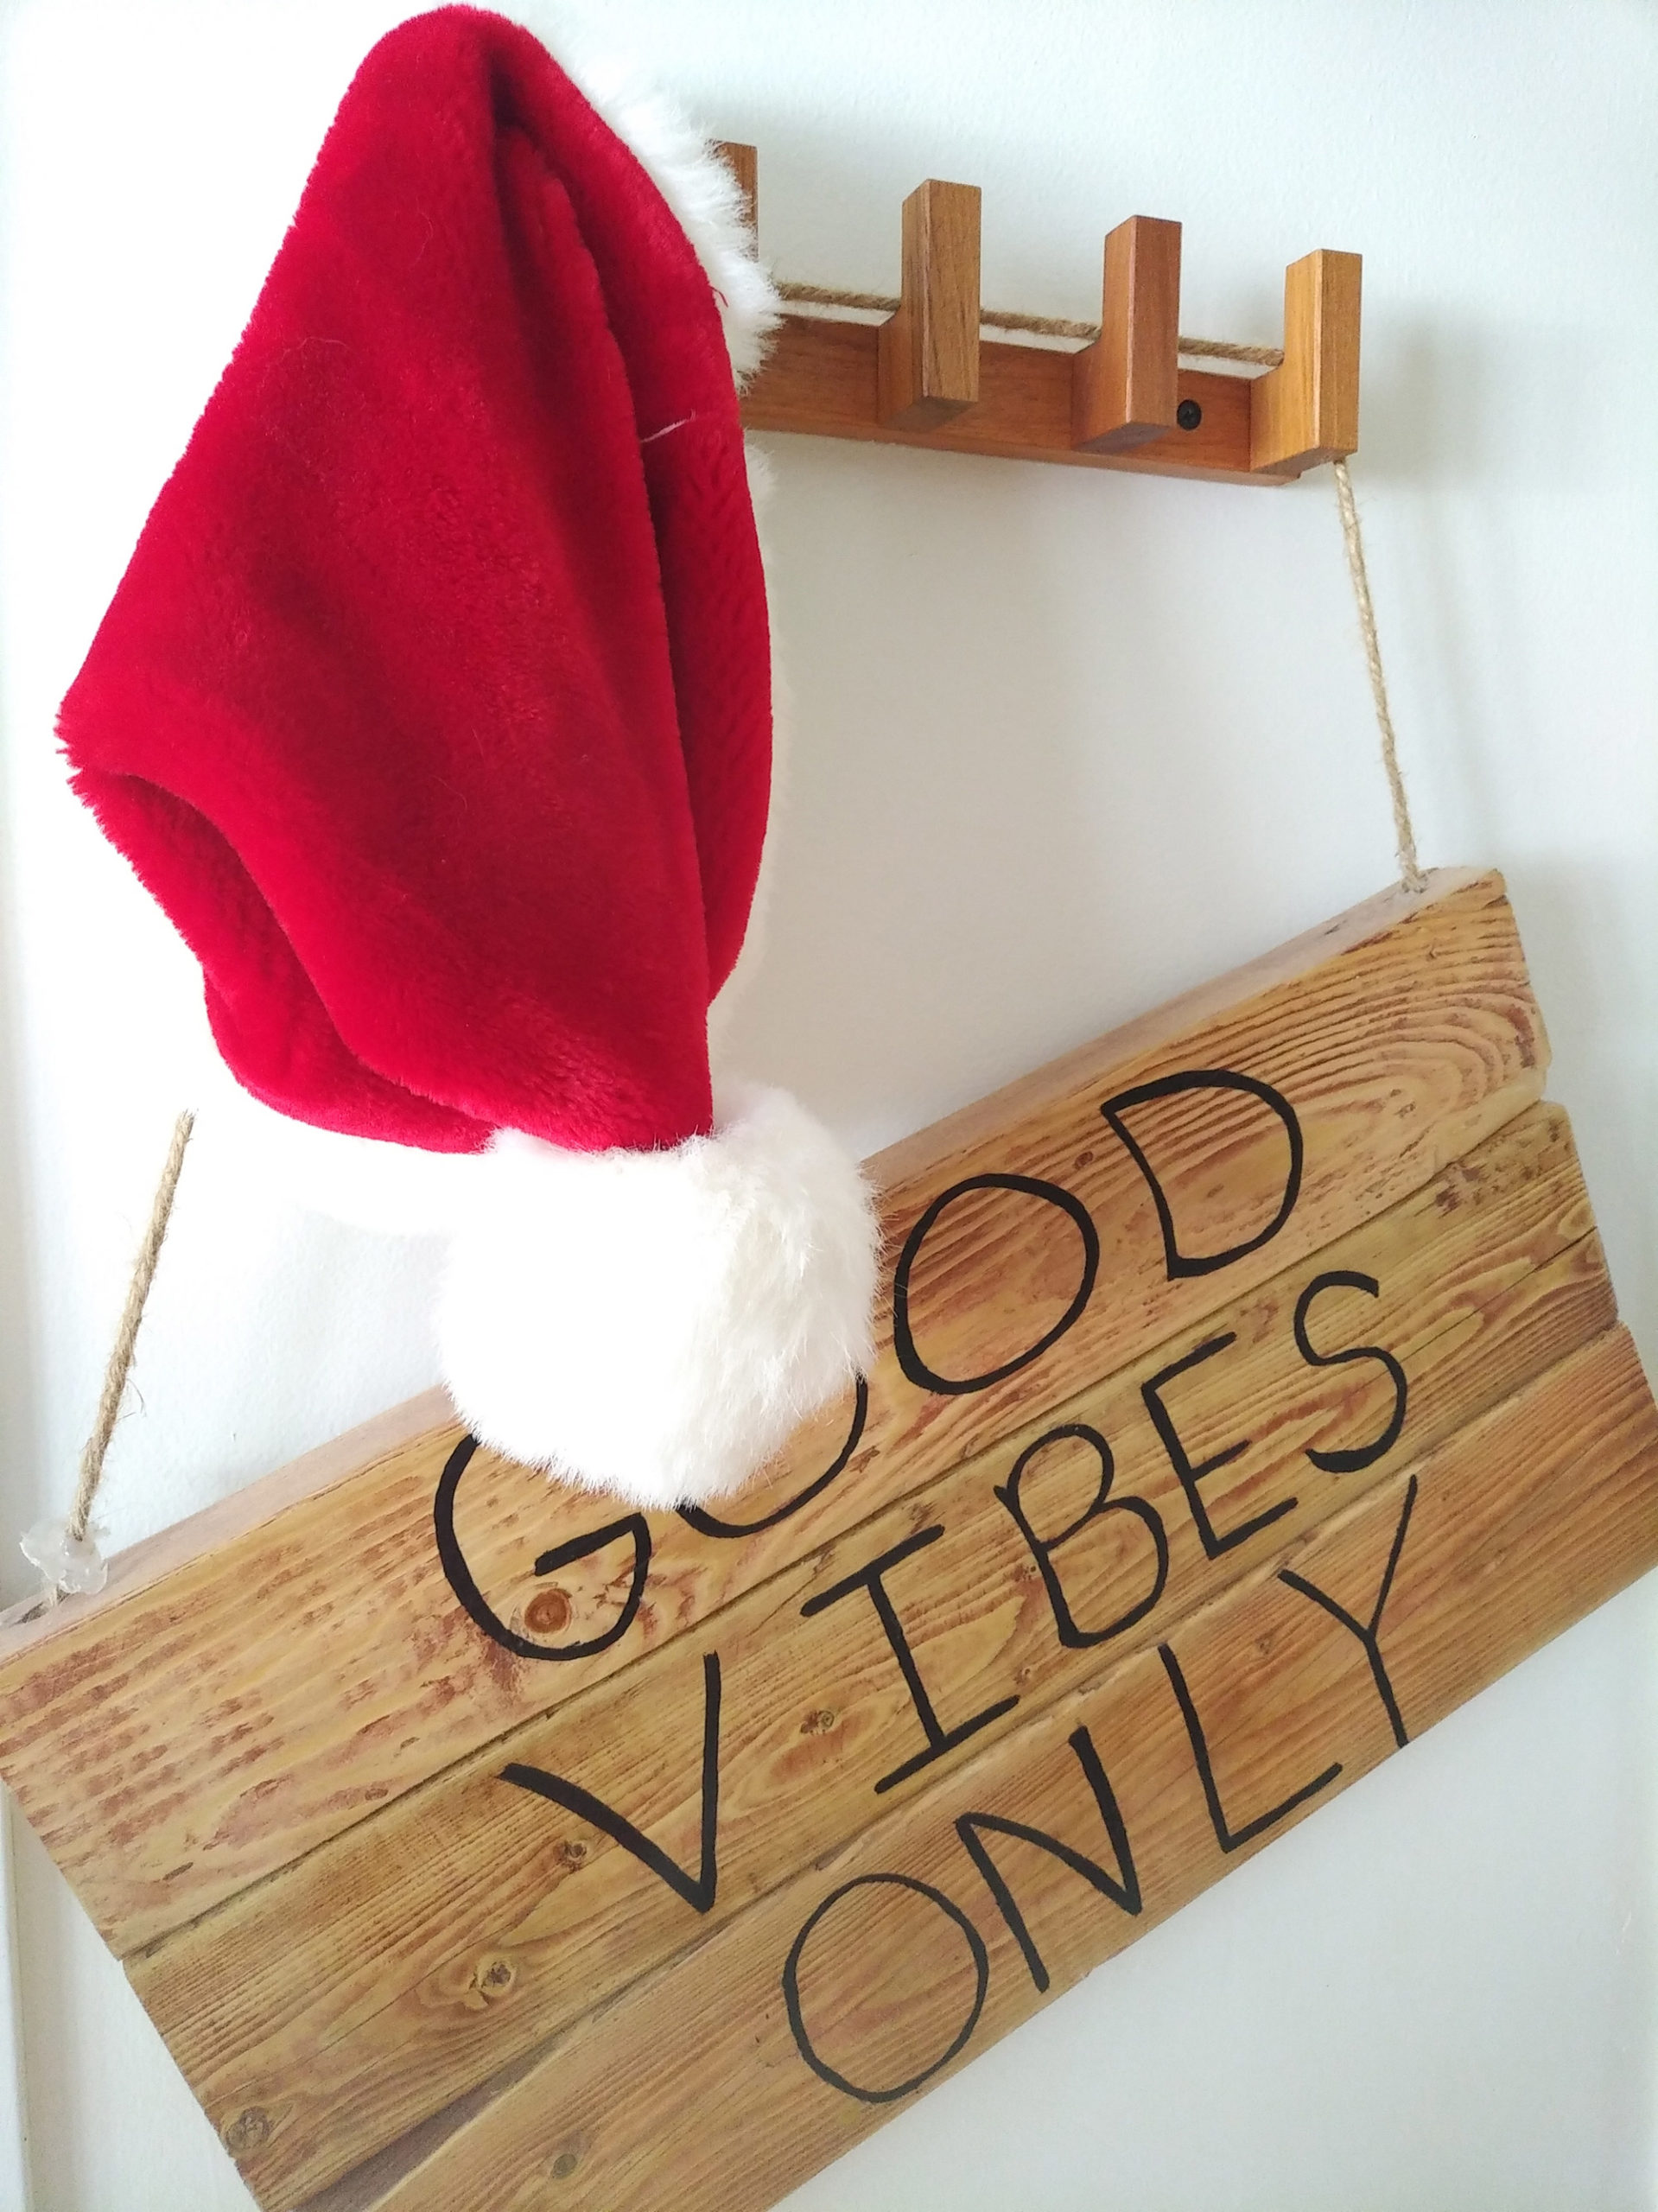 Santa hat on wooden rack with a wooden sign that says "GOOD VIBES ONLY"